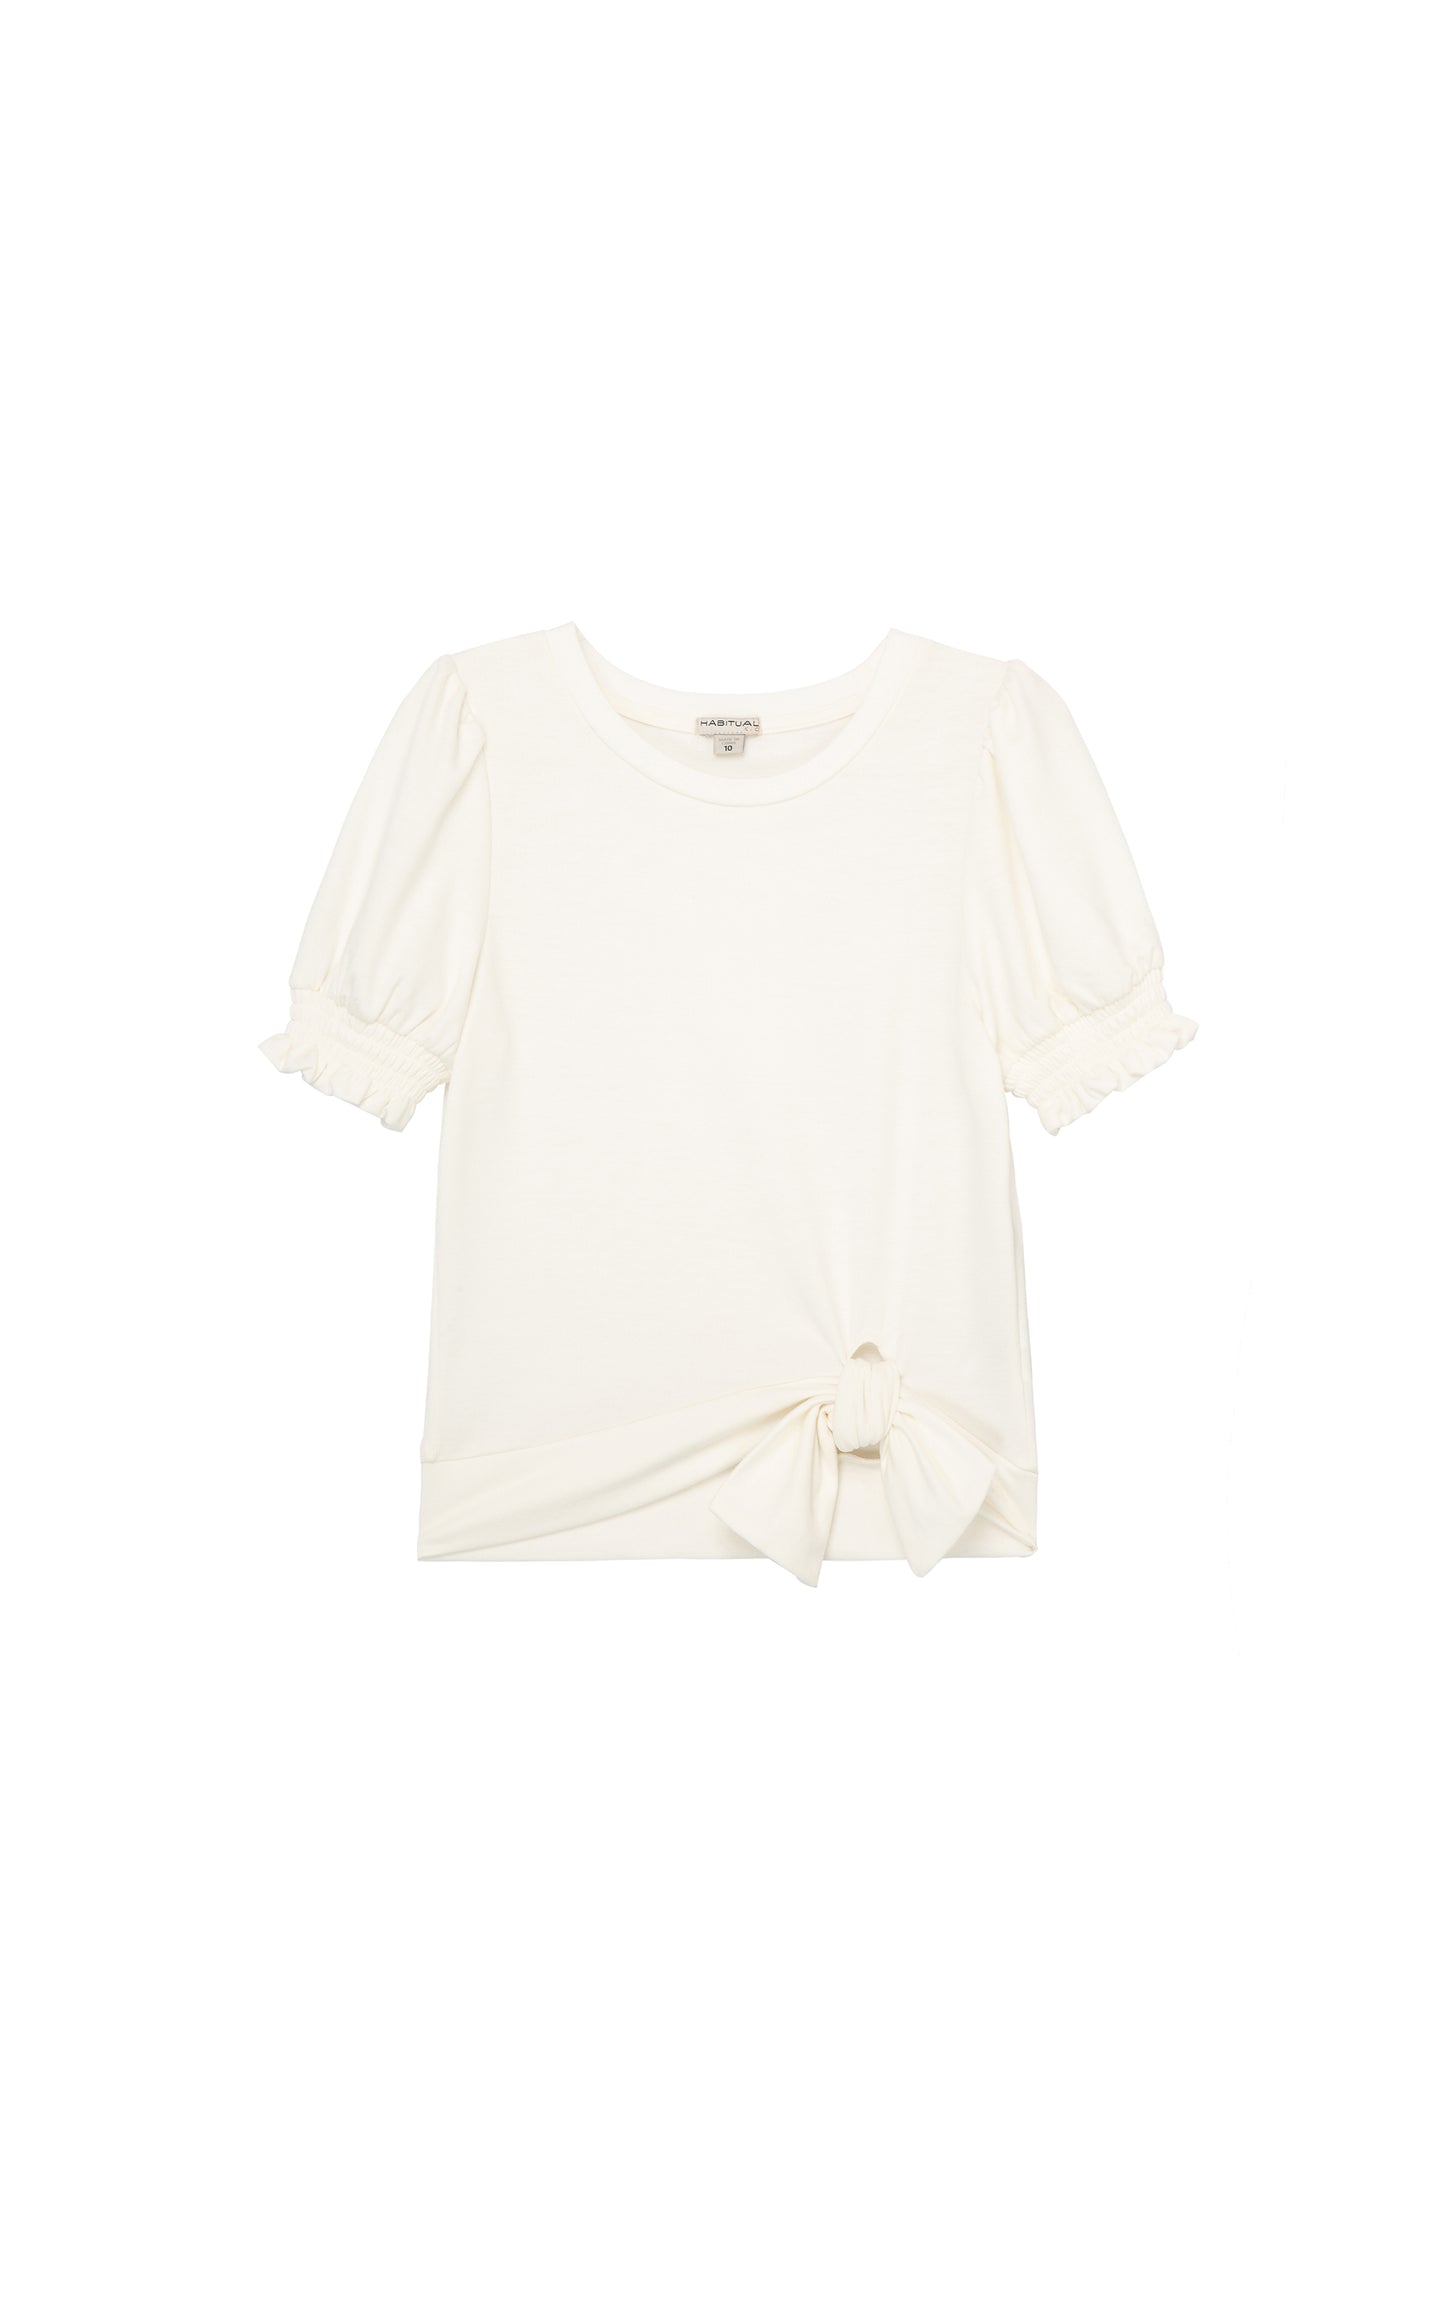 WHITE SHORT SLEEVE KNIT TOP WITH PUFFY AND SMOCKED SLEEVES AND A SIDE TIE WITH A BOW